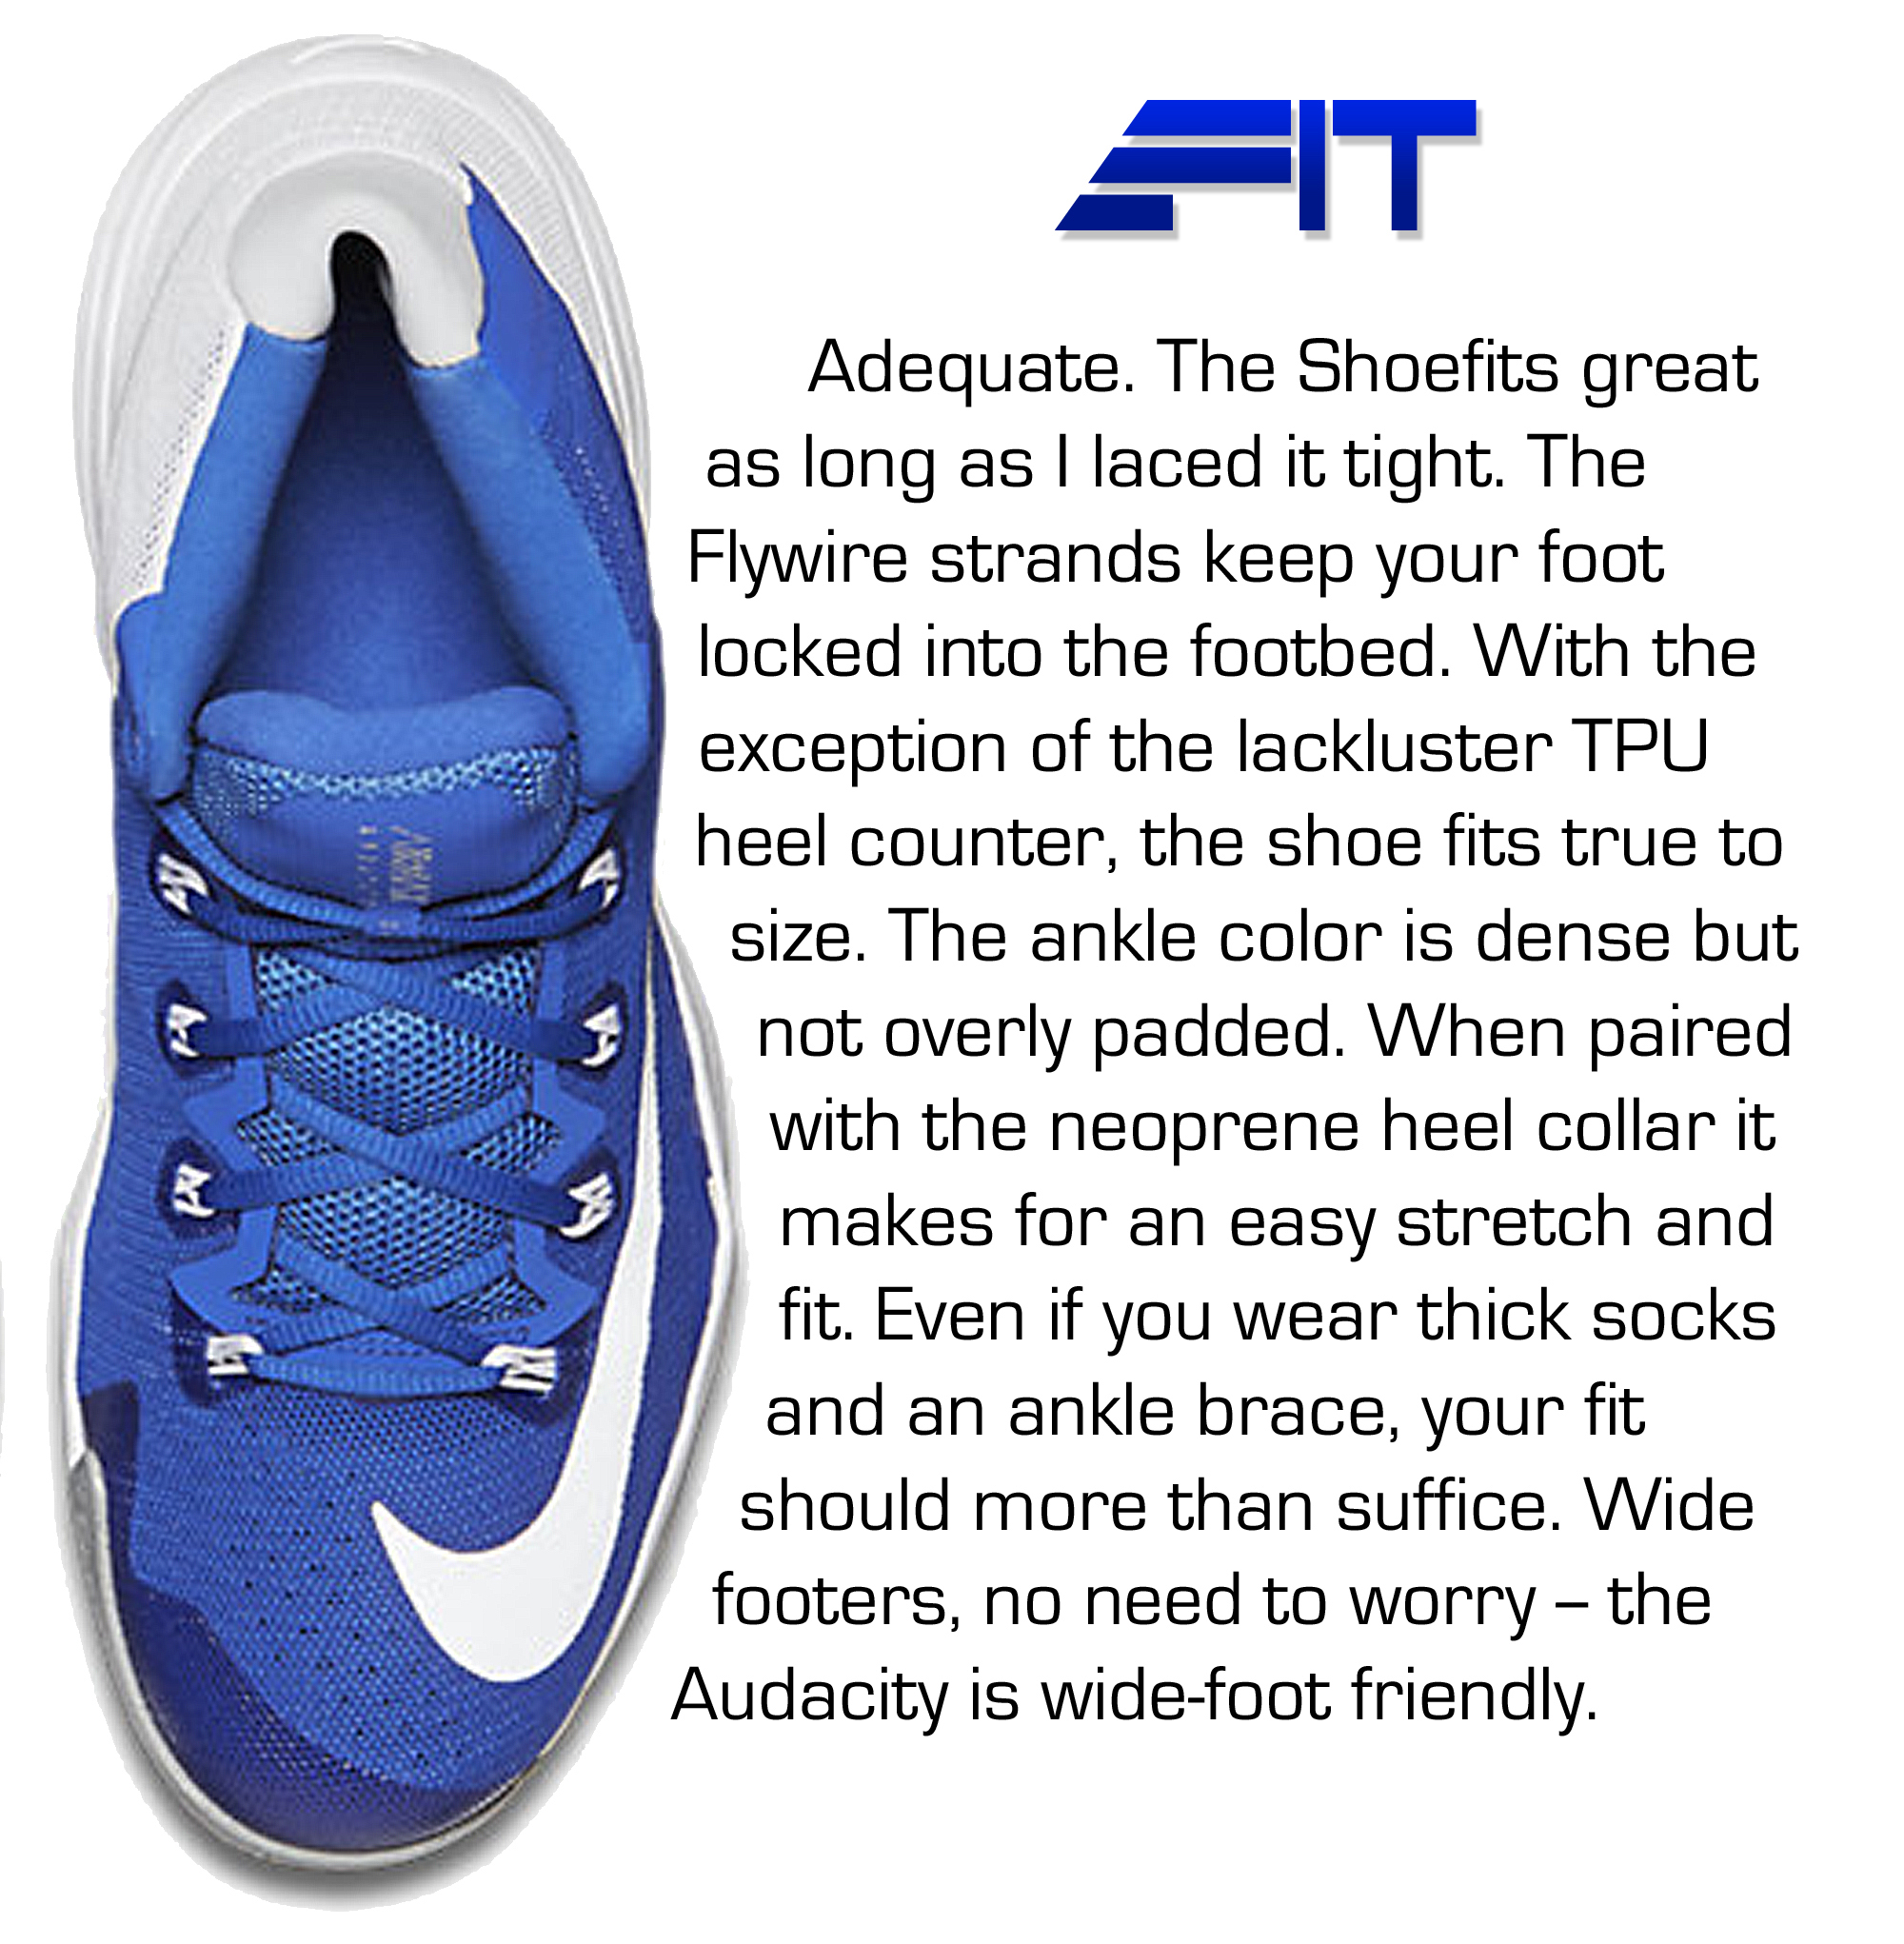 Sherlock Holmes Descomponer primer ministro Nike Air Max Audacity 2016 Performance Review | NYJumpman23 - WearTesters